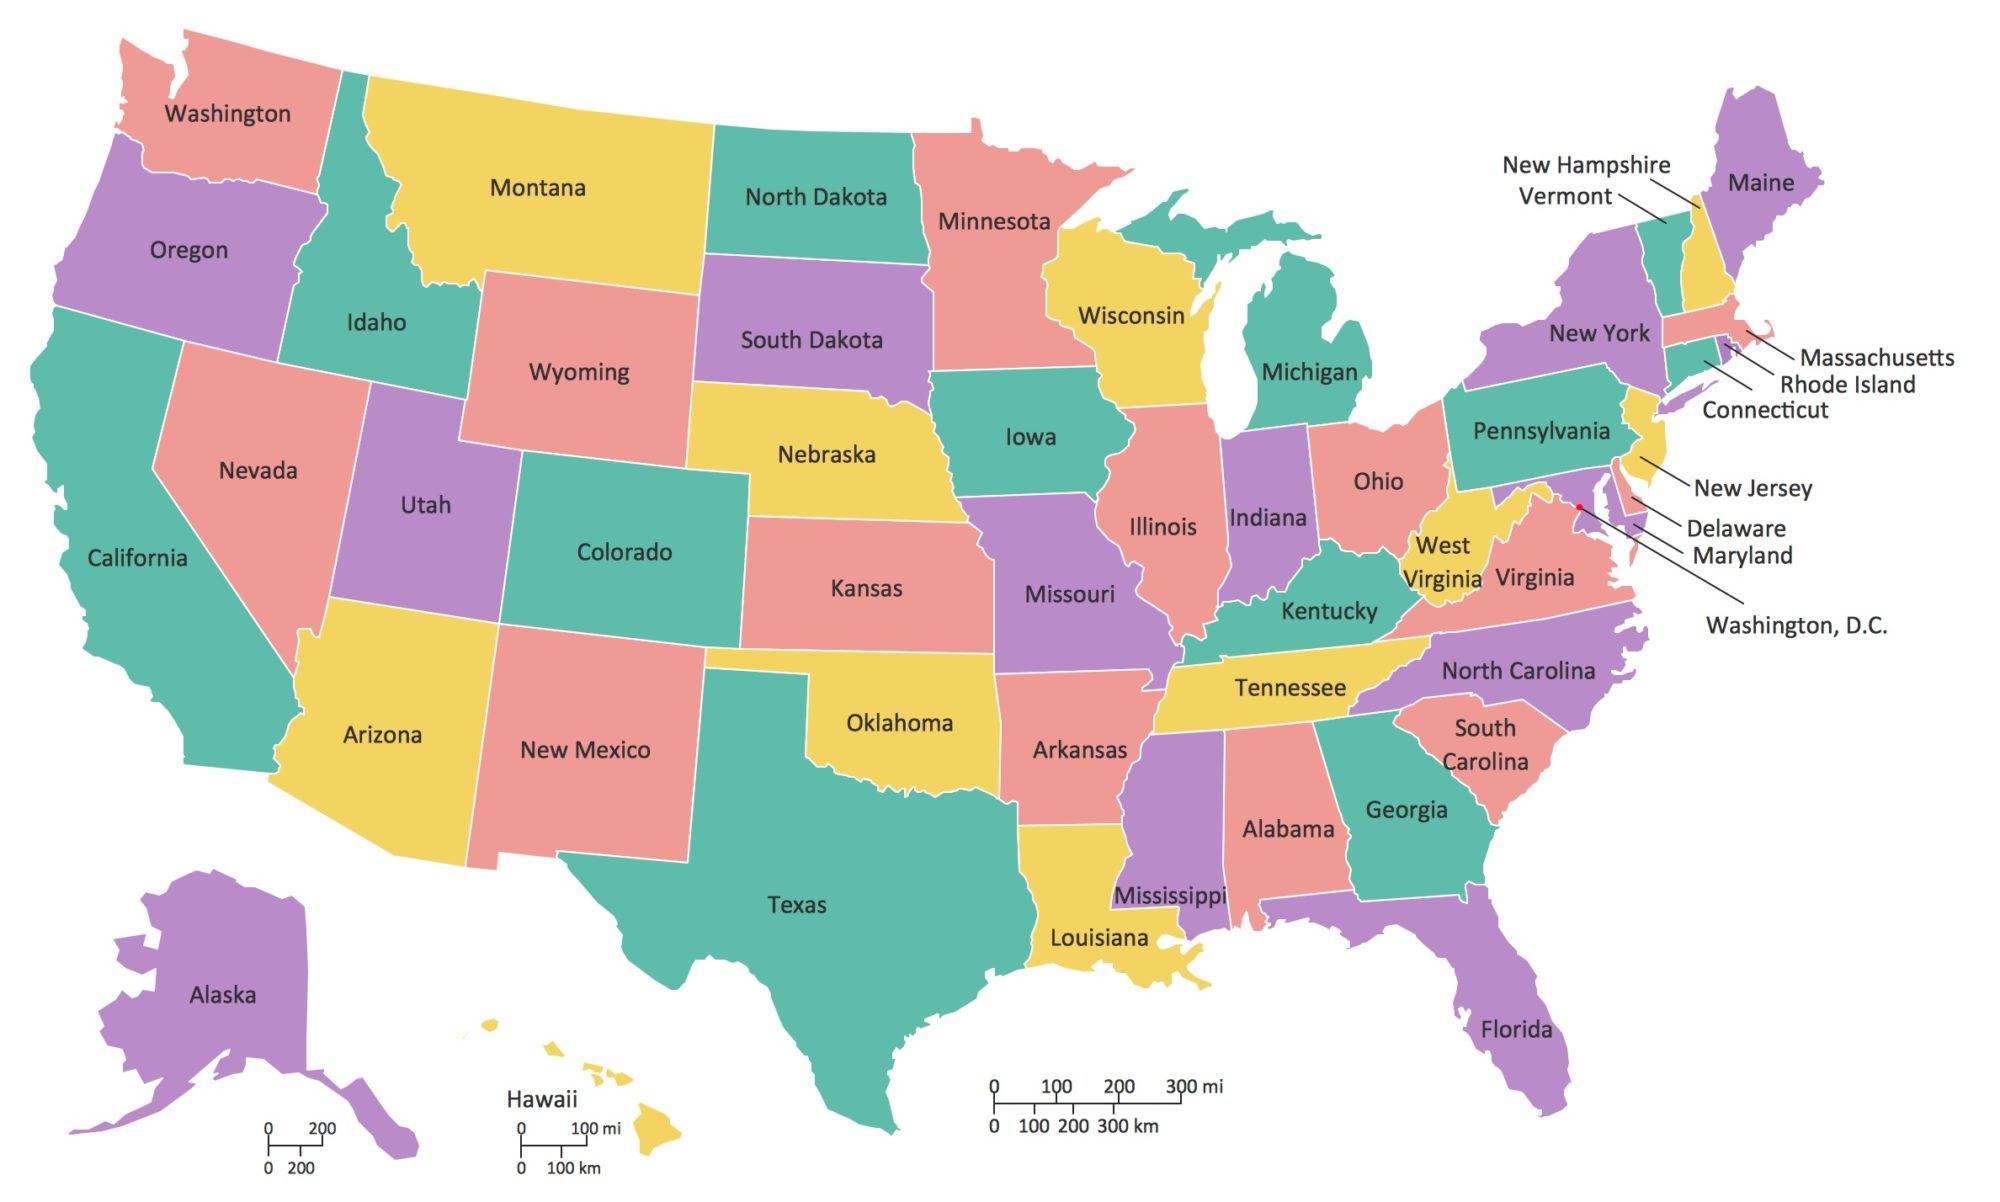 Colorful States Map Of The USA 